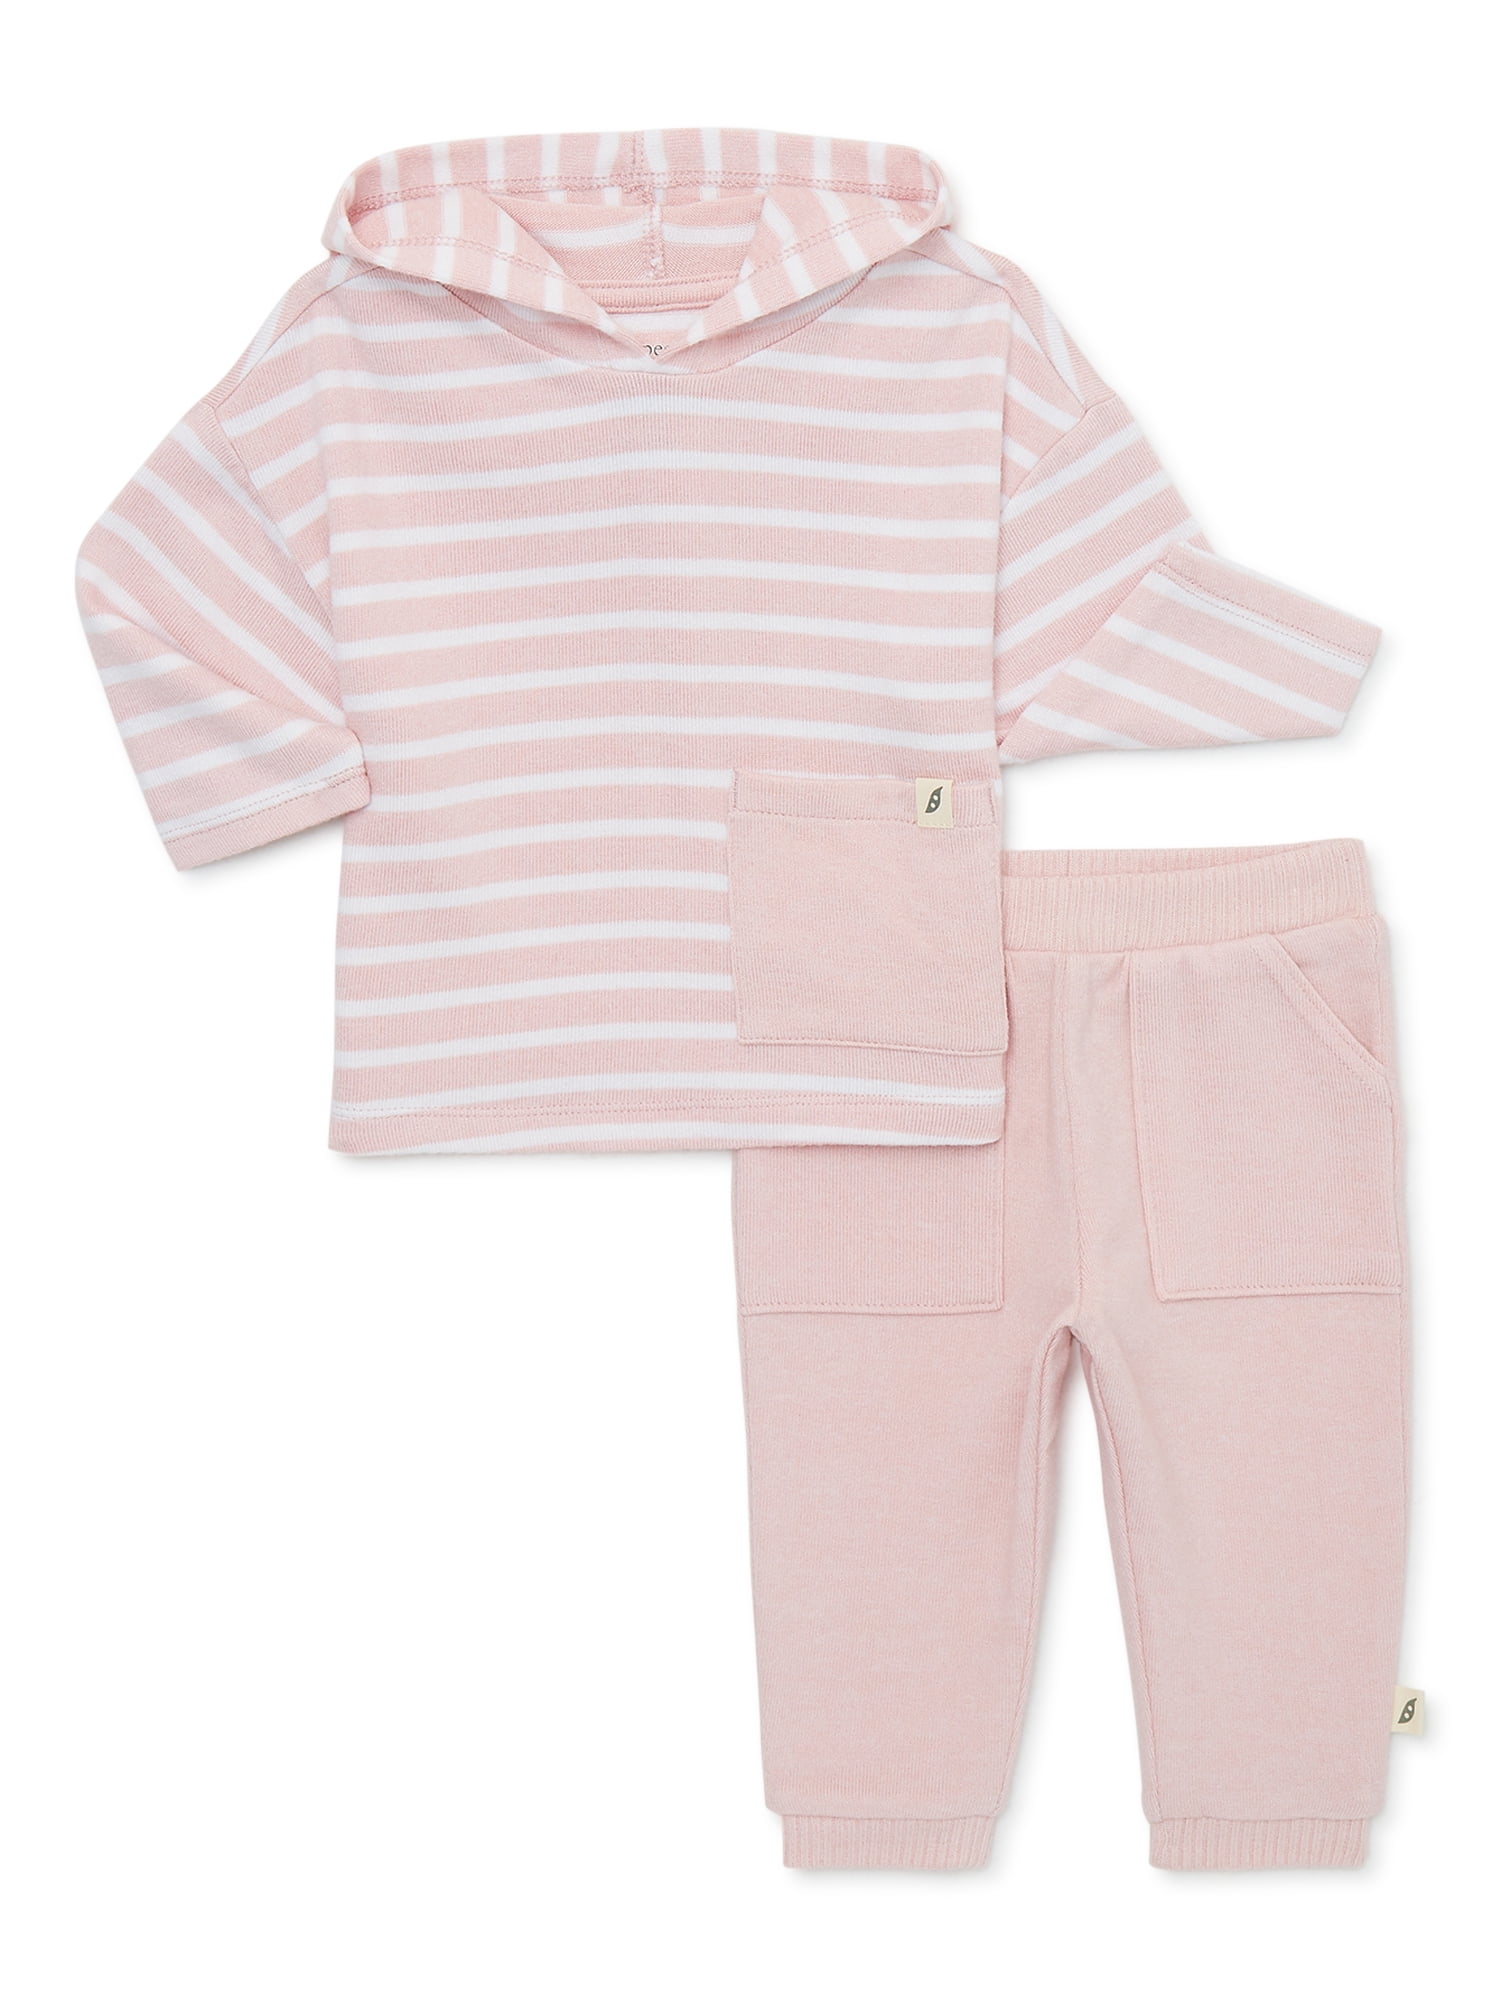 easy-peasy Baby Hoodie and Jogger Pants Outfit Set, 2-Piece, Sizes 0/3 ...